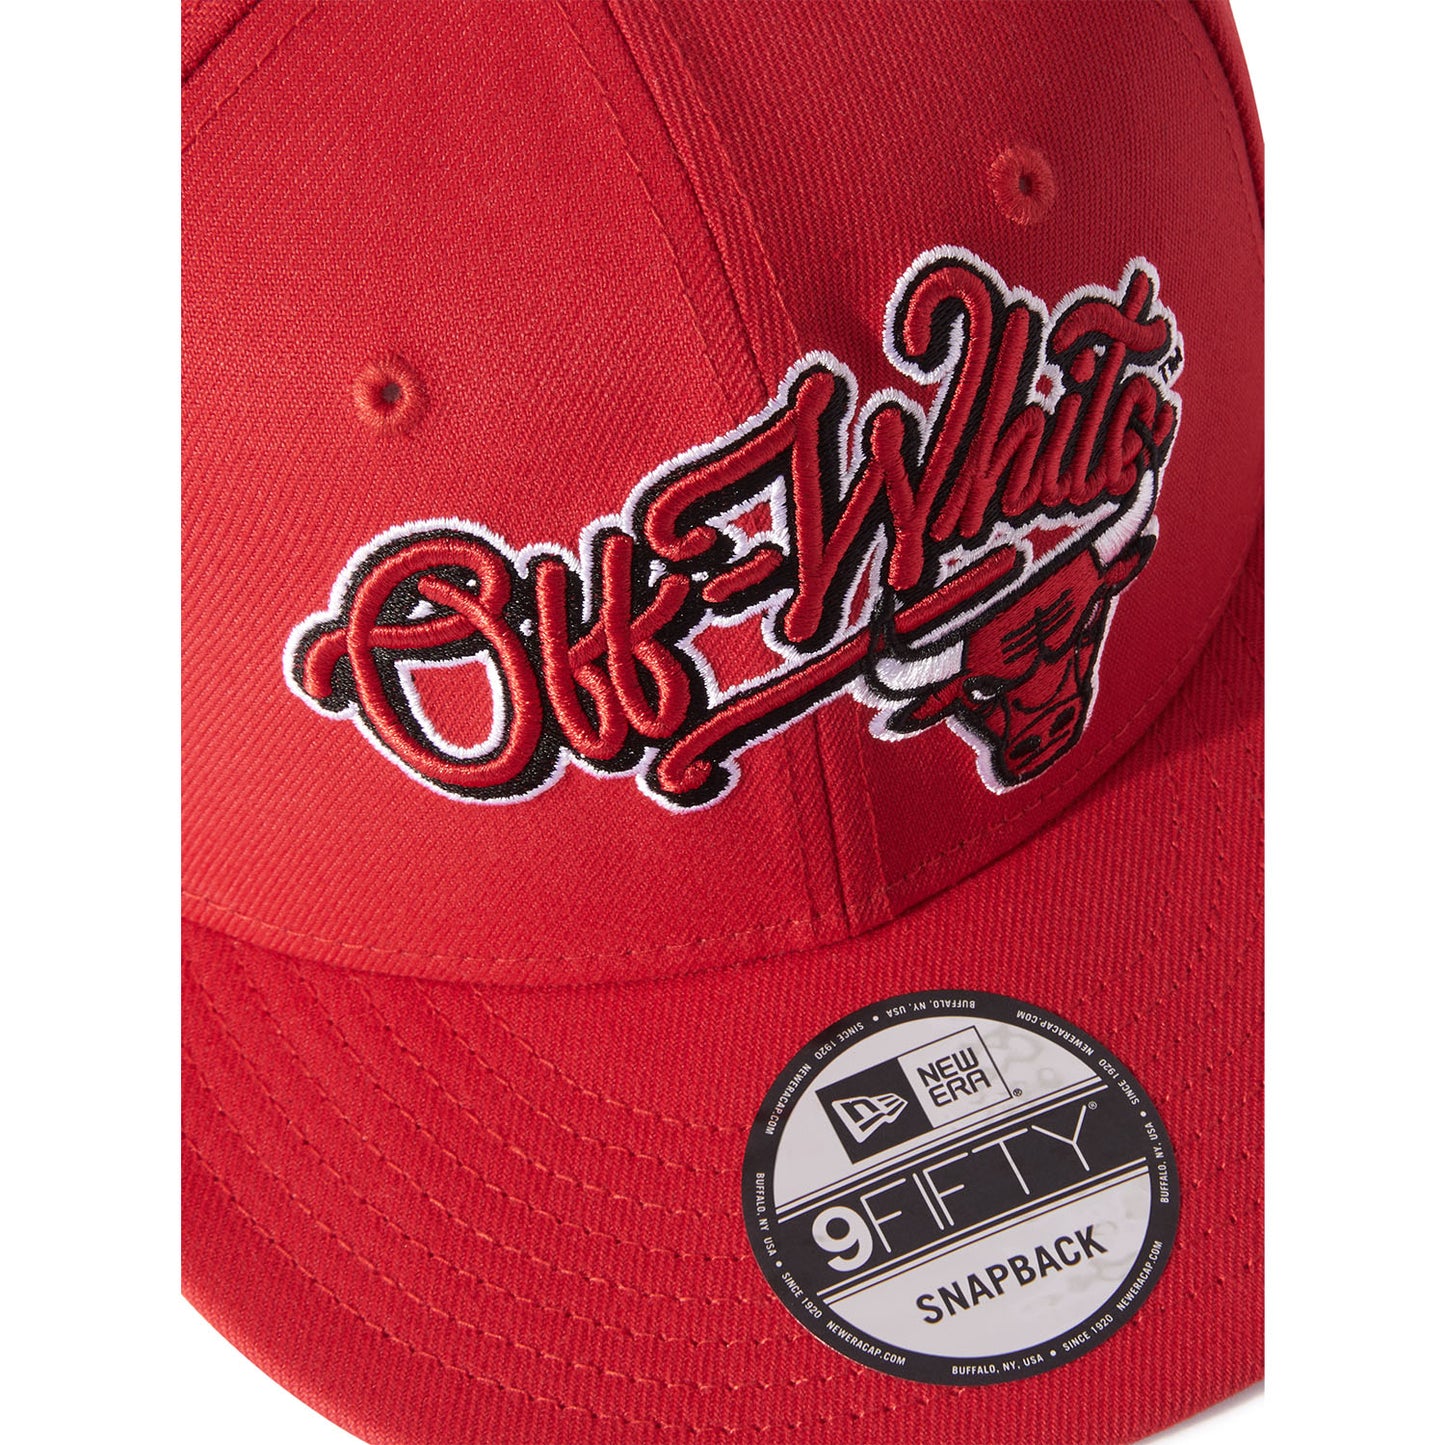 Chicago Bulls New Era Off-White Hat - Red - up close view